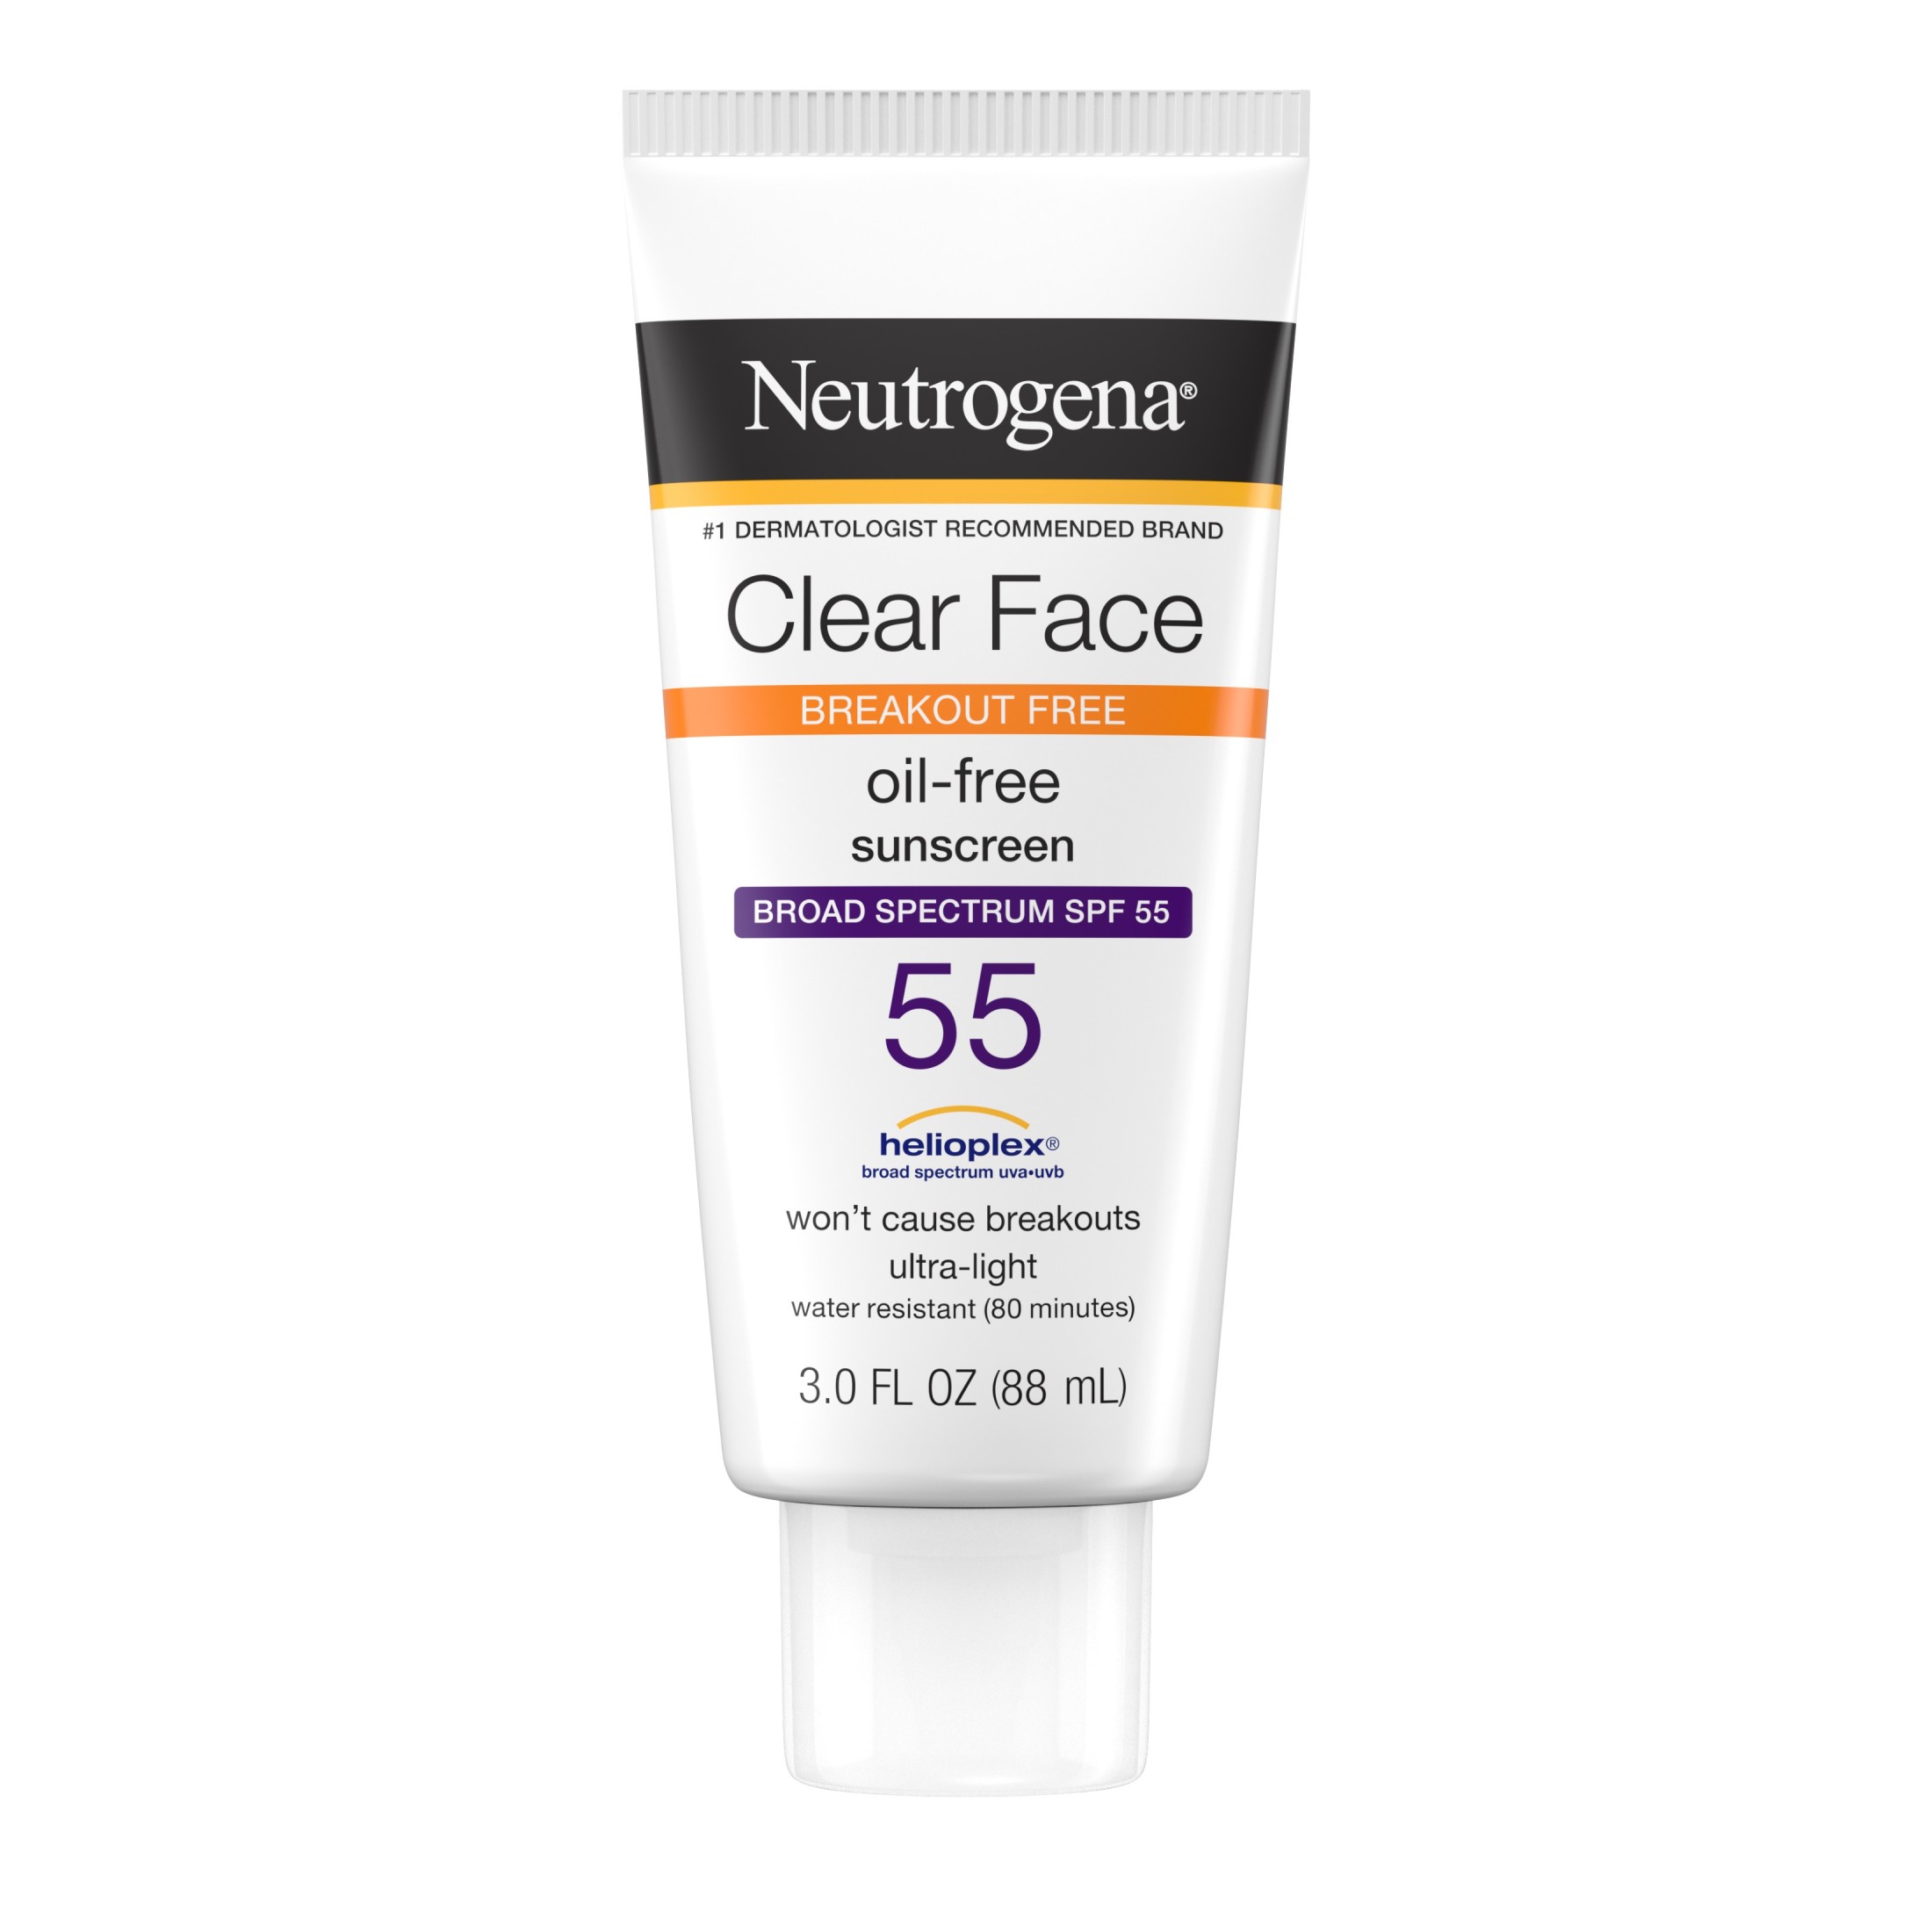 Neutrogena Clear Face Liquid Lotion Sunscreen with SPF 50, 3 fl. oz - image 1 of 16